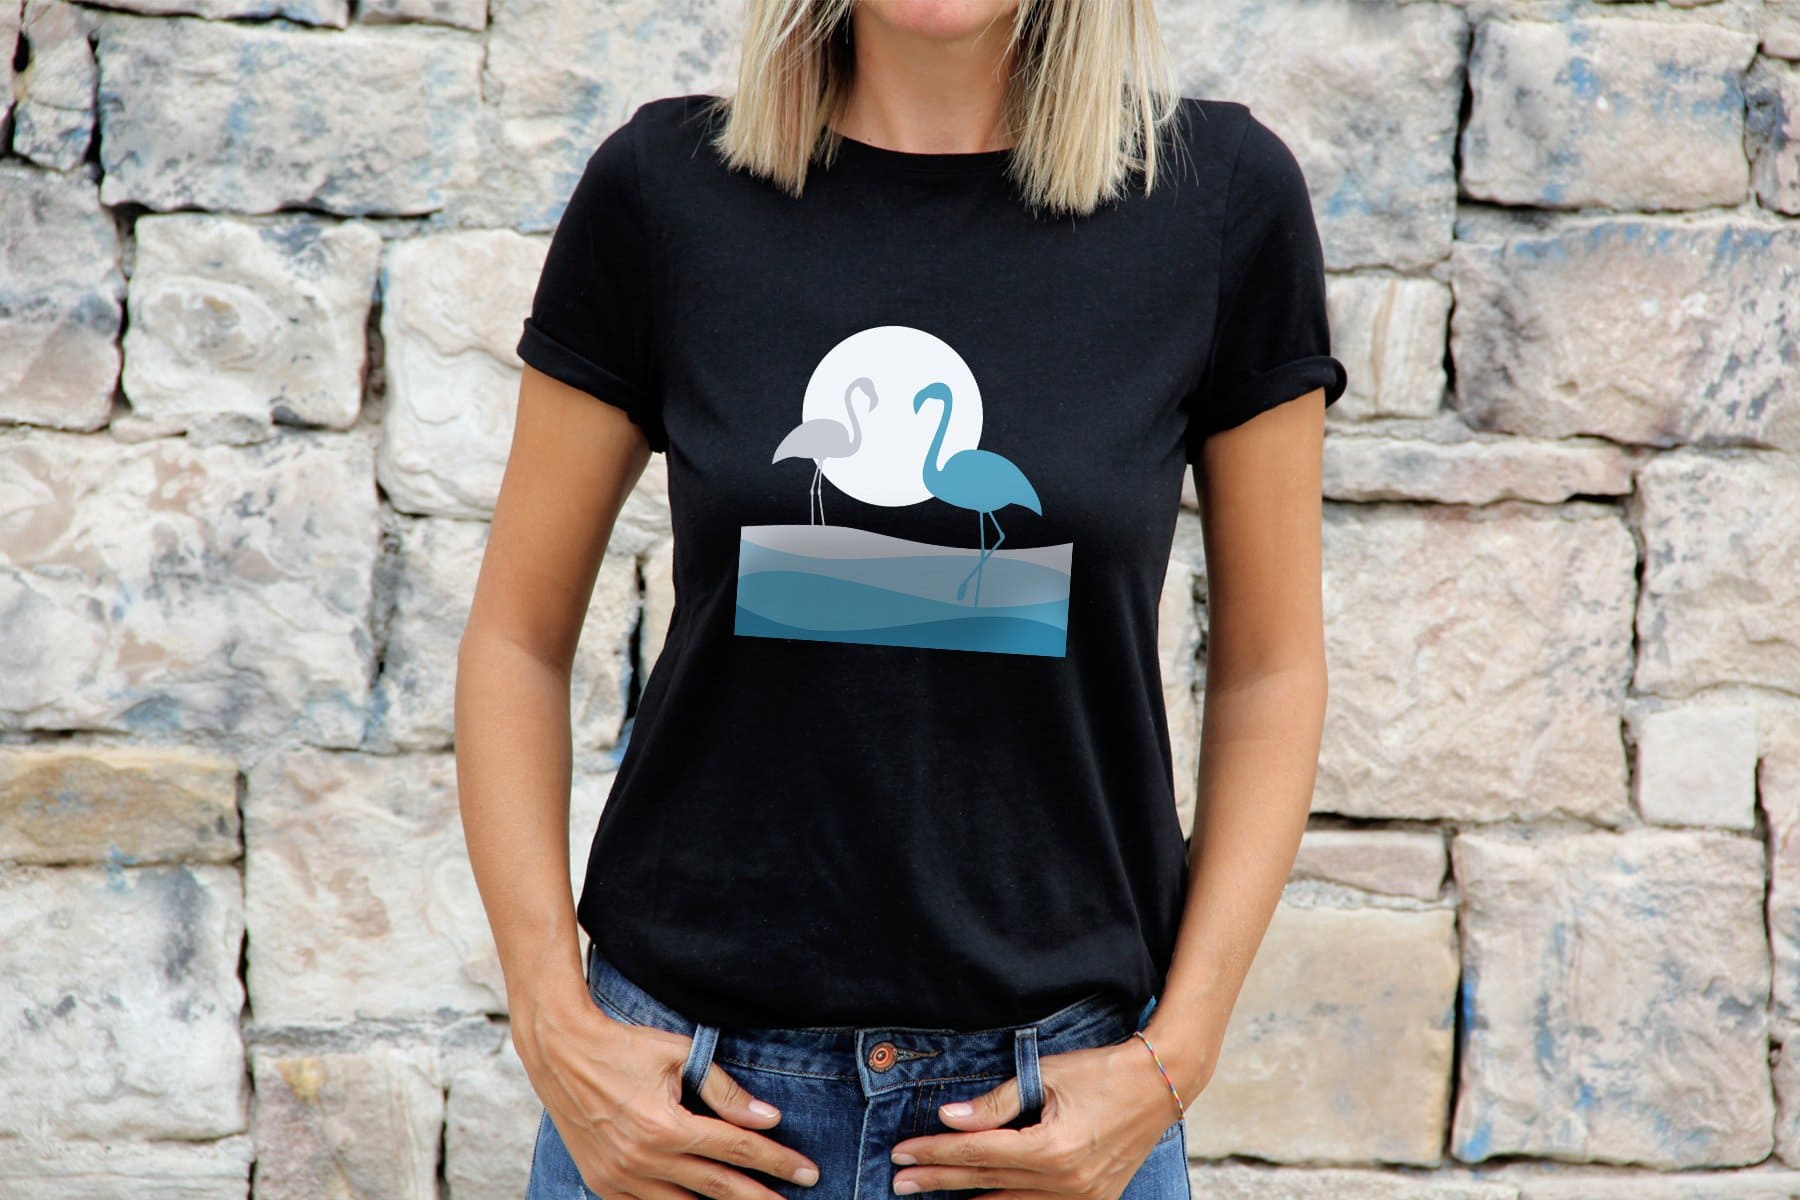 The black t-shirt features flamingos in white and blue.